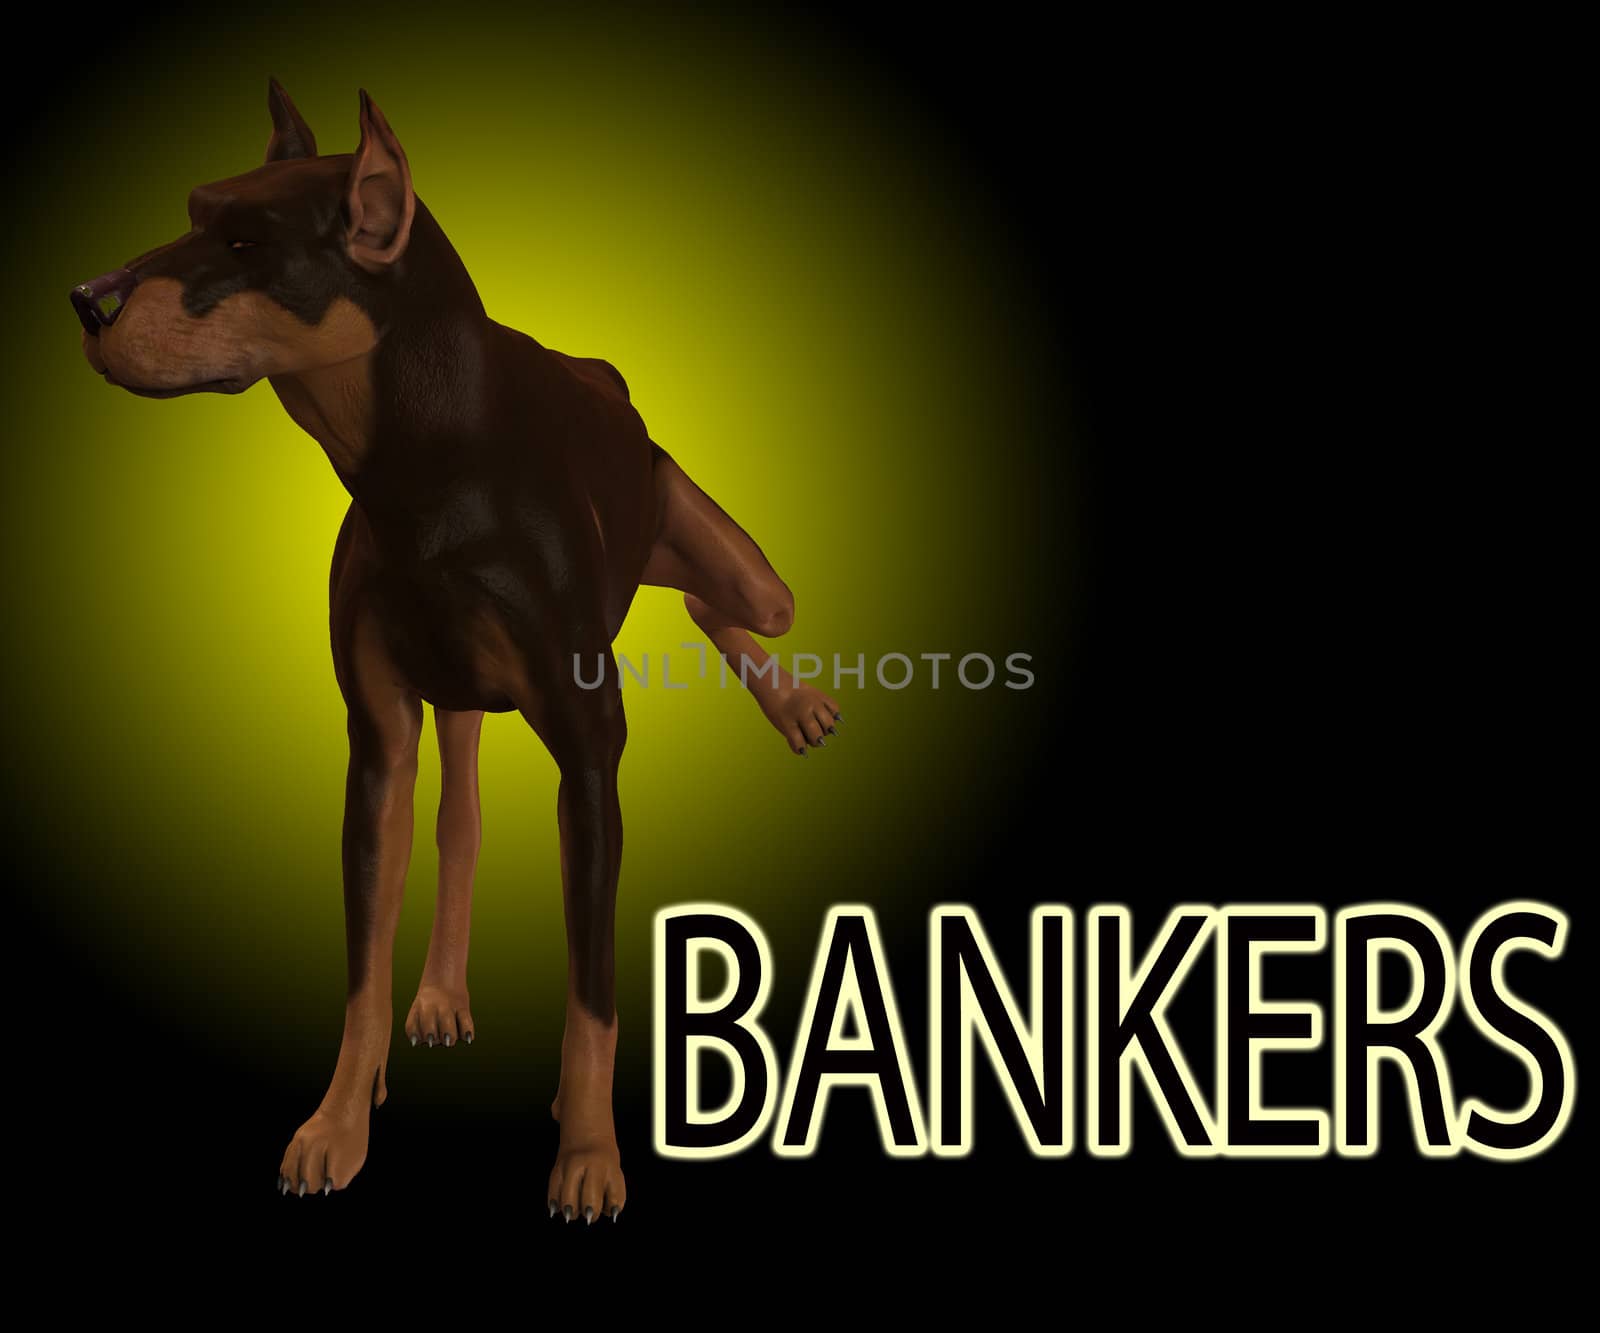 Dog that is showing its utter contempt for bankers.